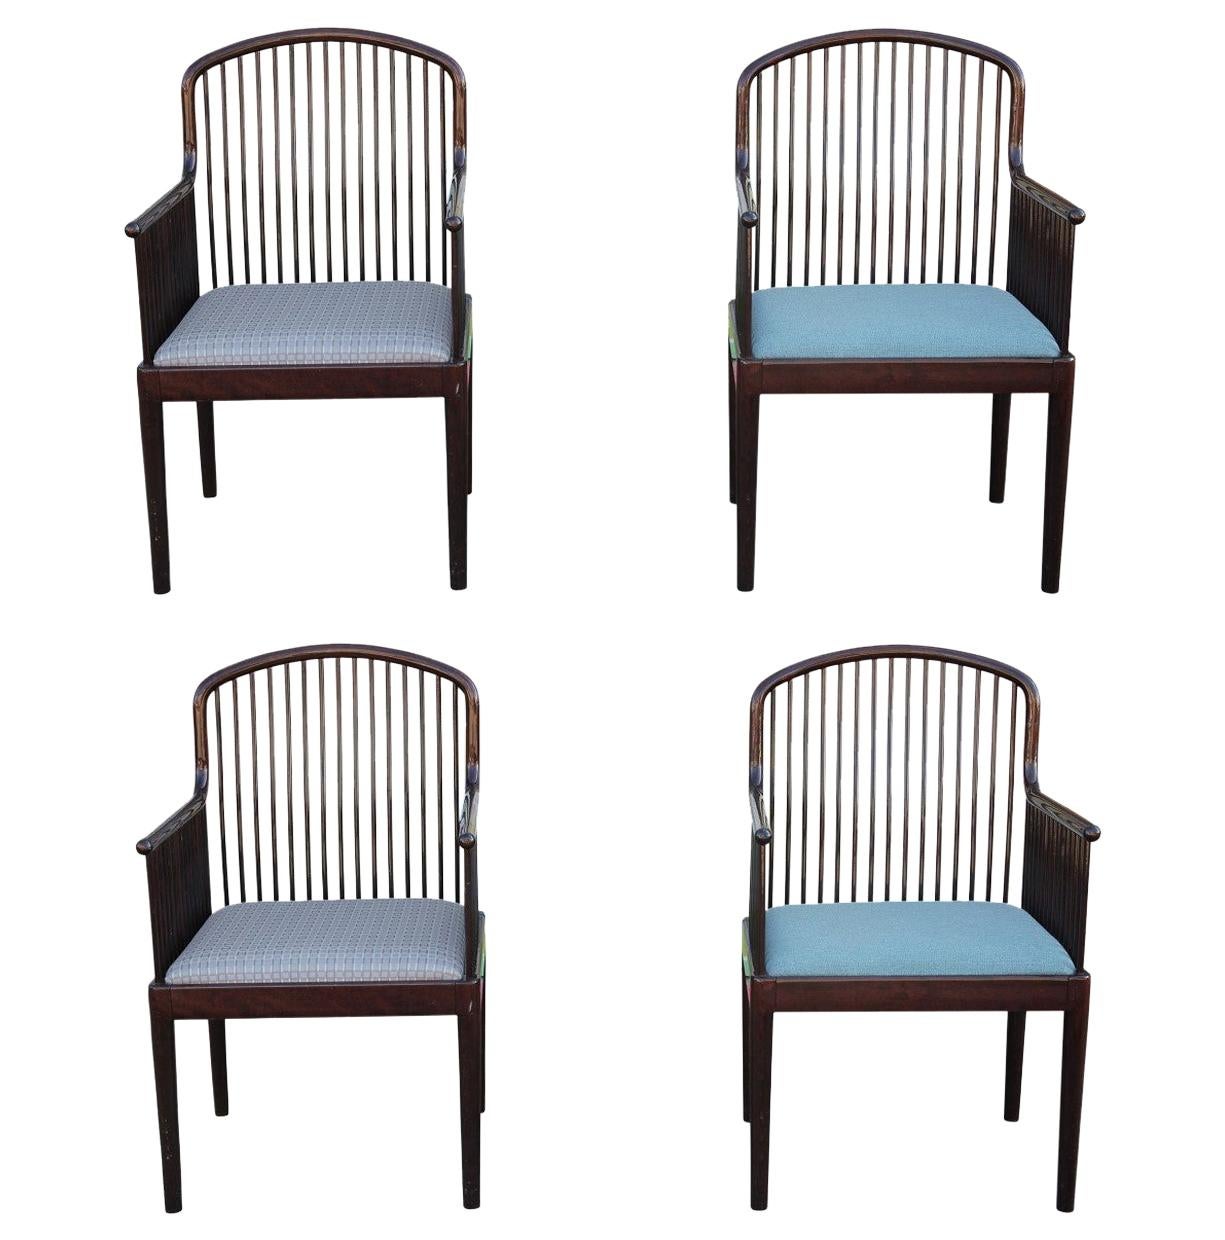 Set of 4 Andover Spindle Framed Dining Chairs by David Allen for Stendig